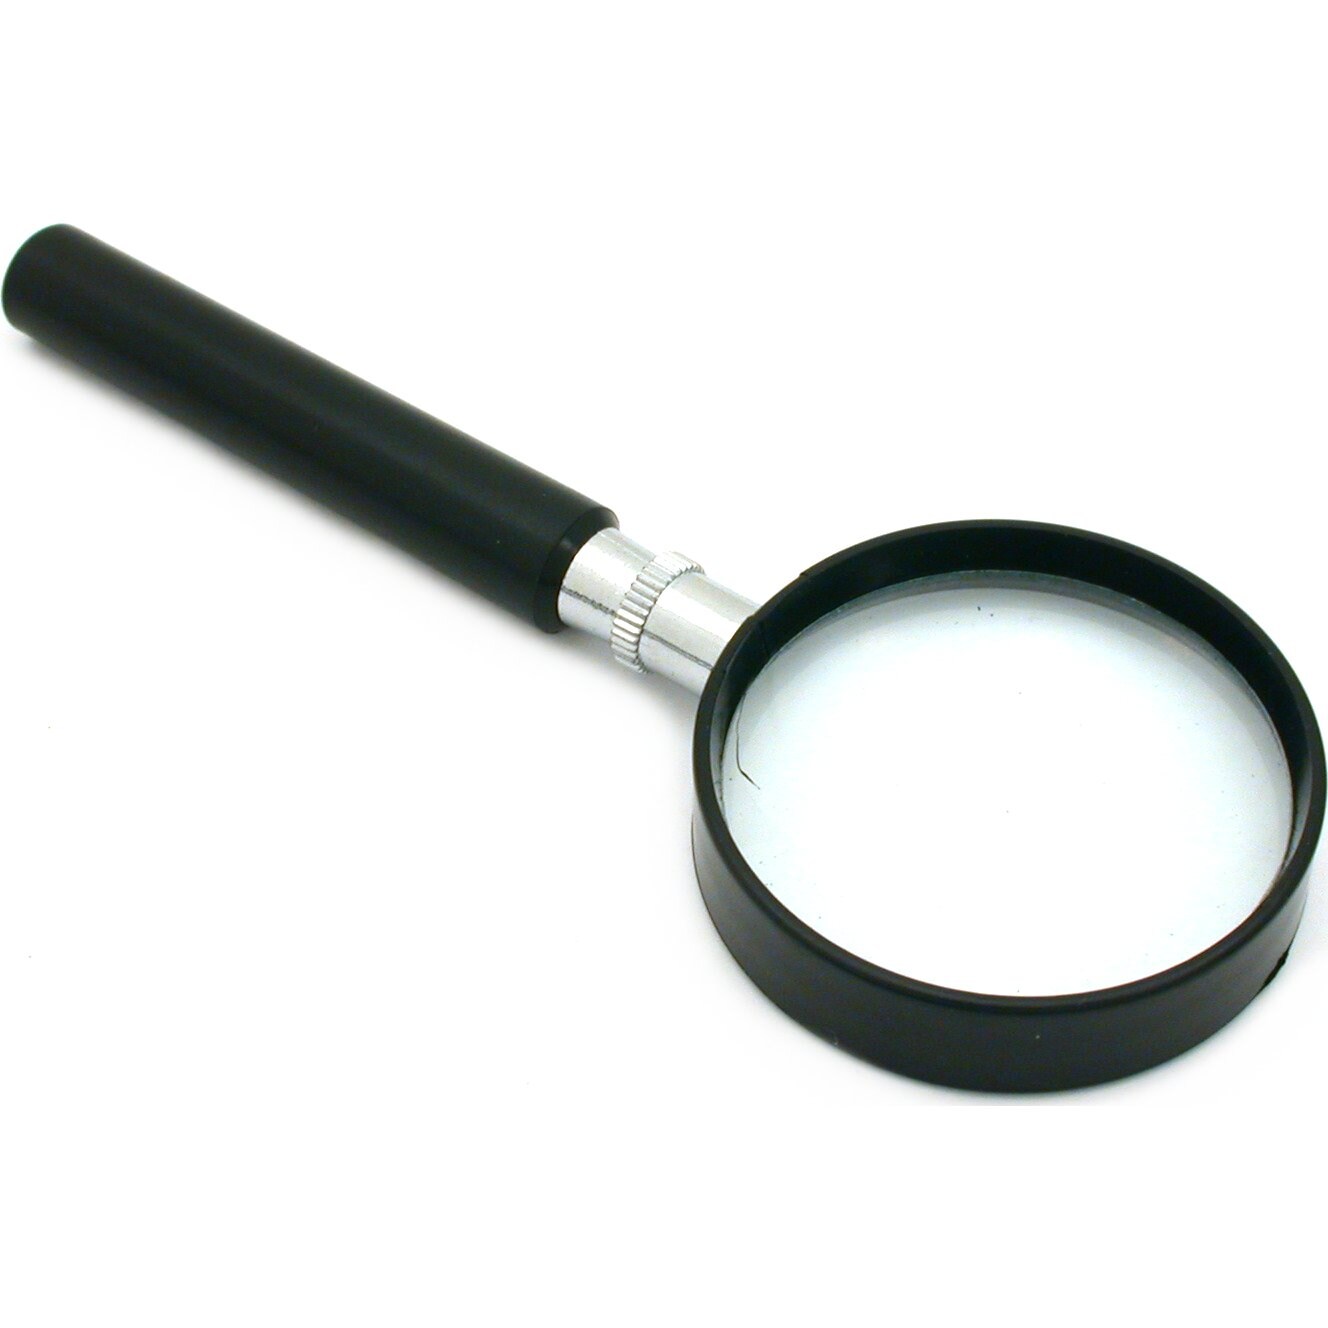 3x High Power Magnifying Glass Super Size Magnifier 2&#x22;